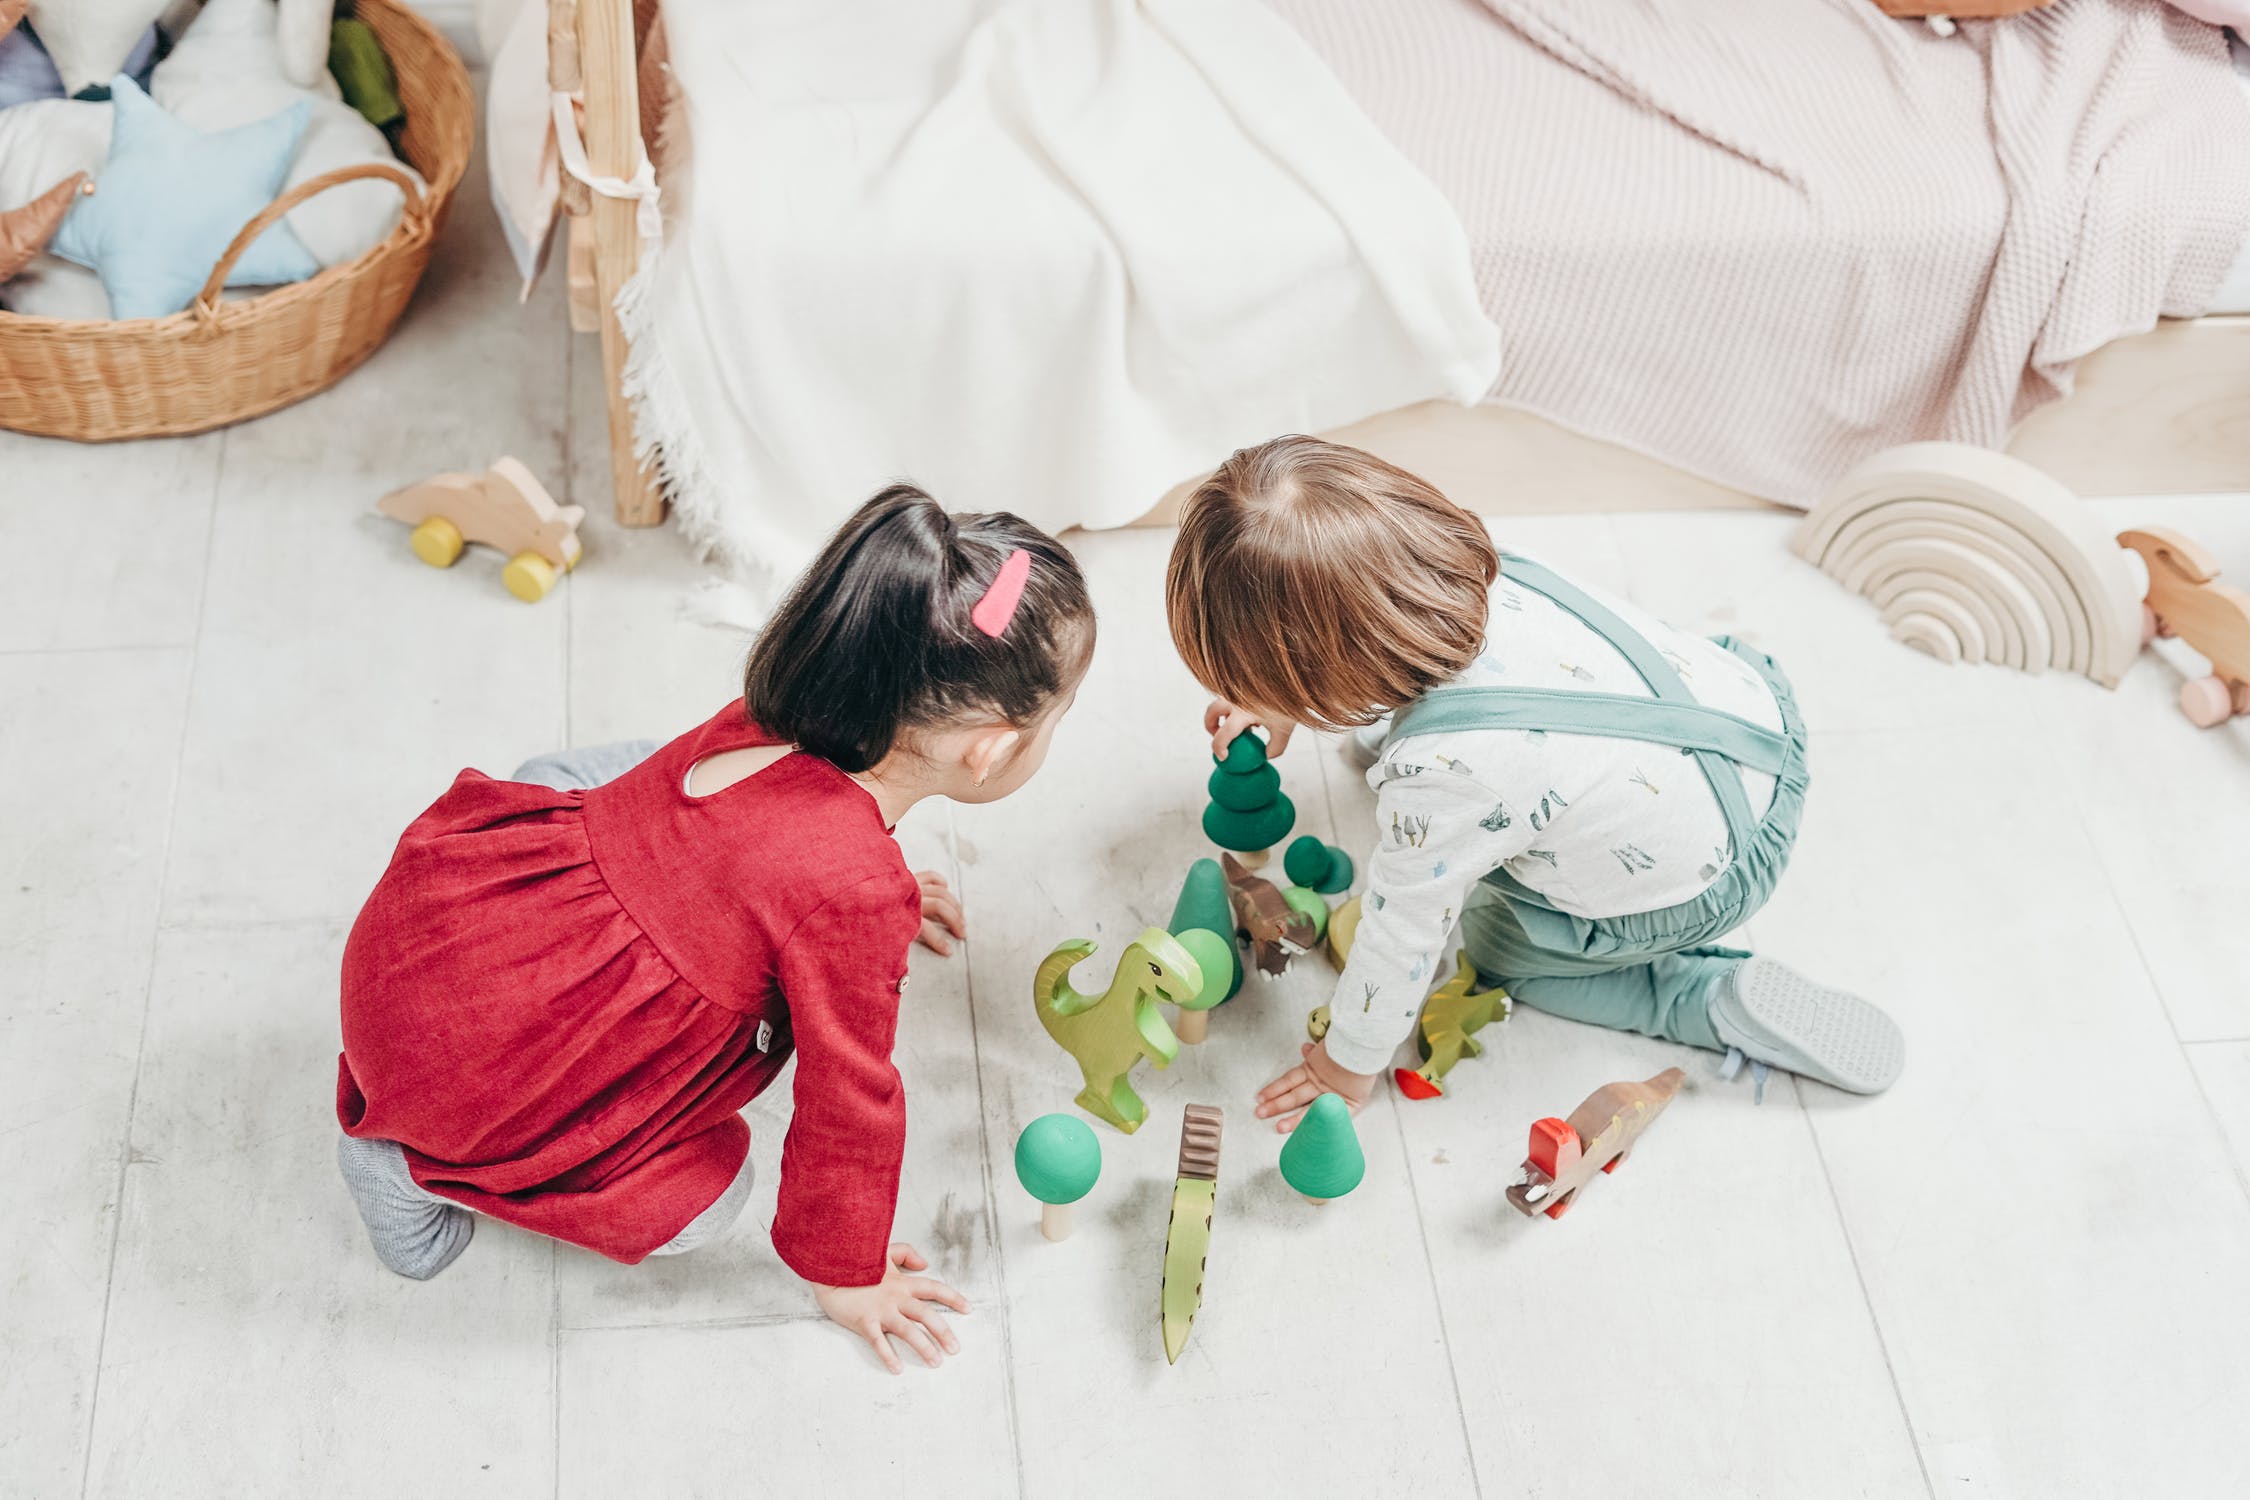 Two girls playing on the floor with green toys such as dinosaurs